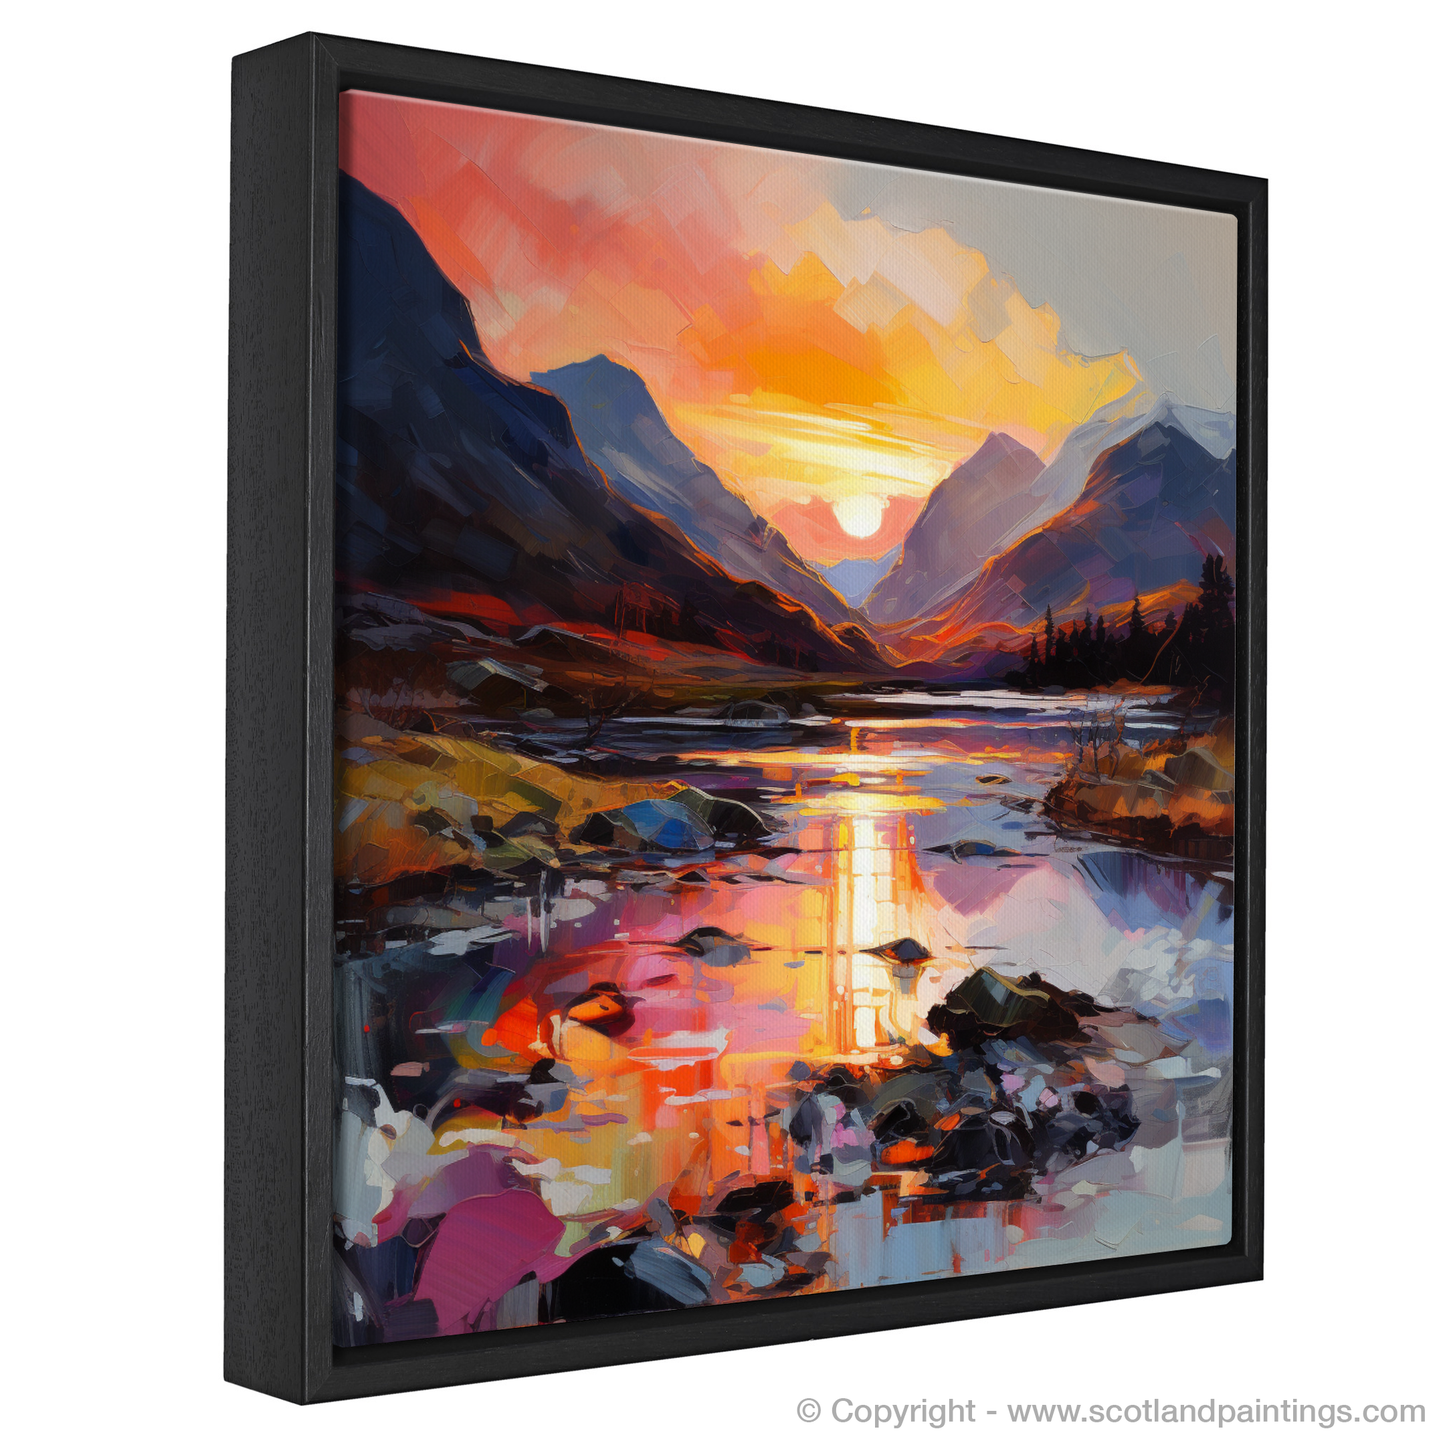 Painting and Art Print of Sunset glow in Glencoe entitled "Fiery Sunset Embrace in Glencoe".